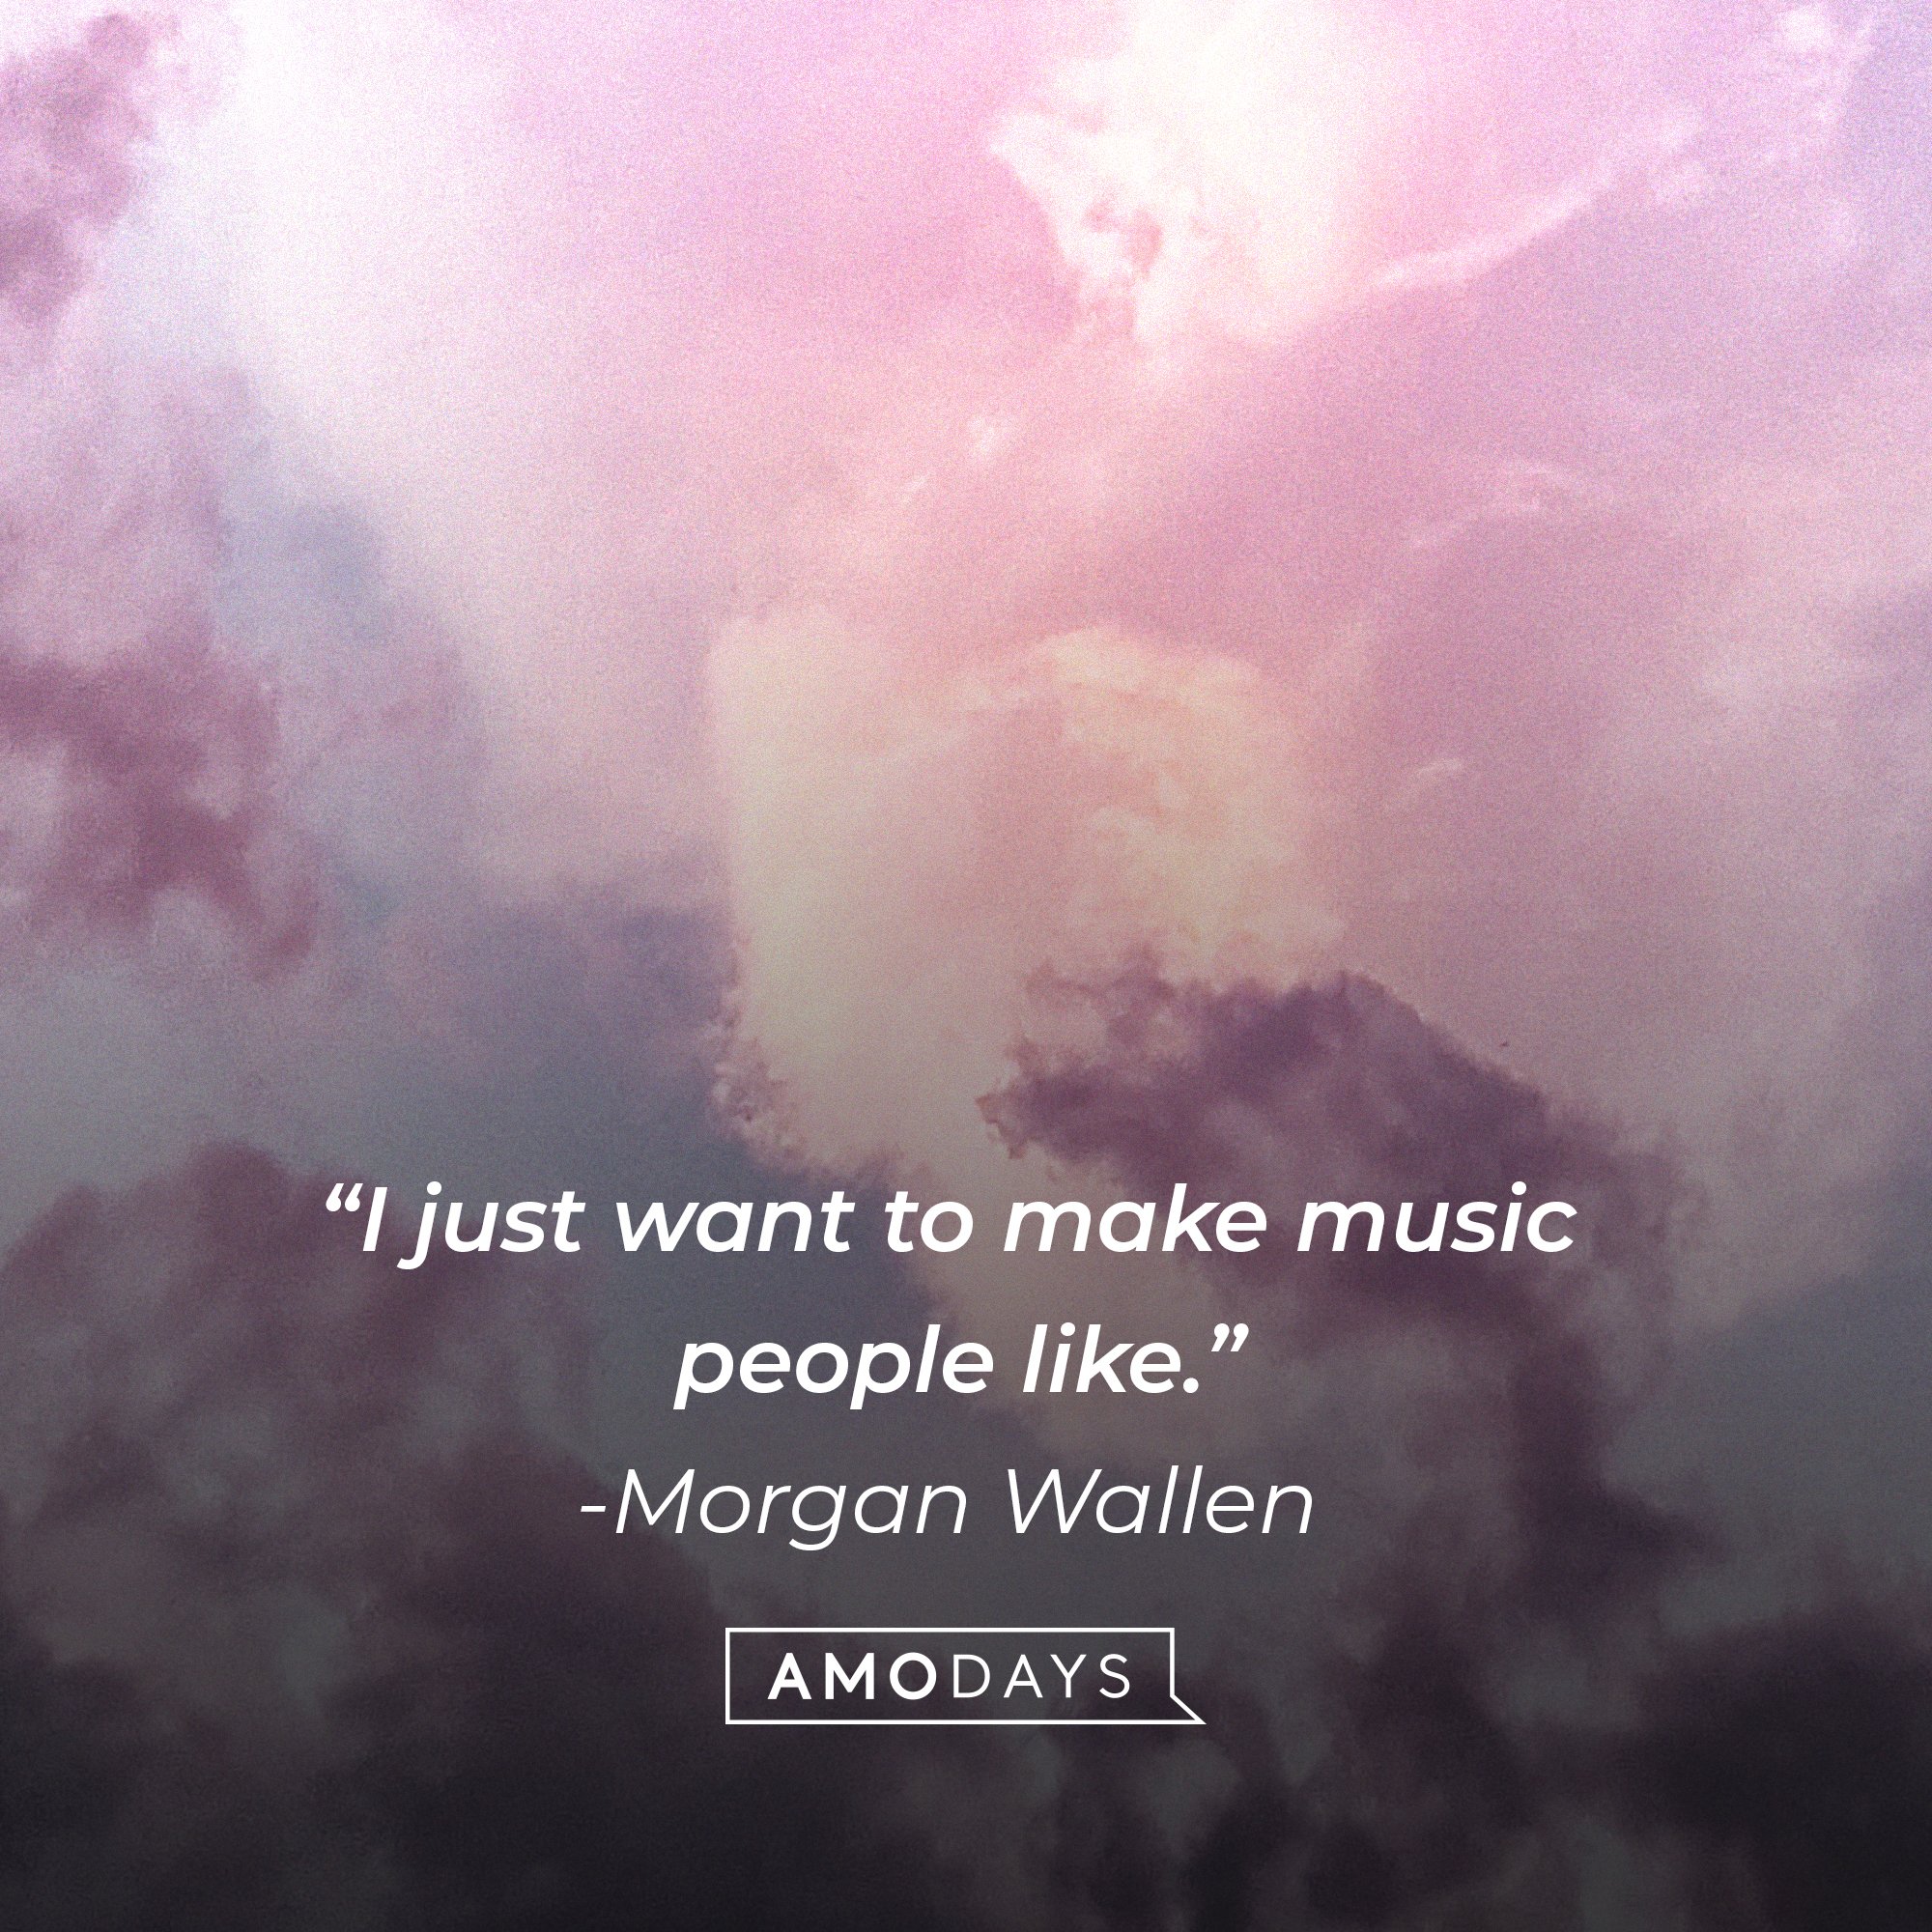  Morgan Wallen’s quote: “I just want to make music people like.” | I Image: AmoDays